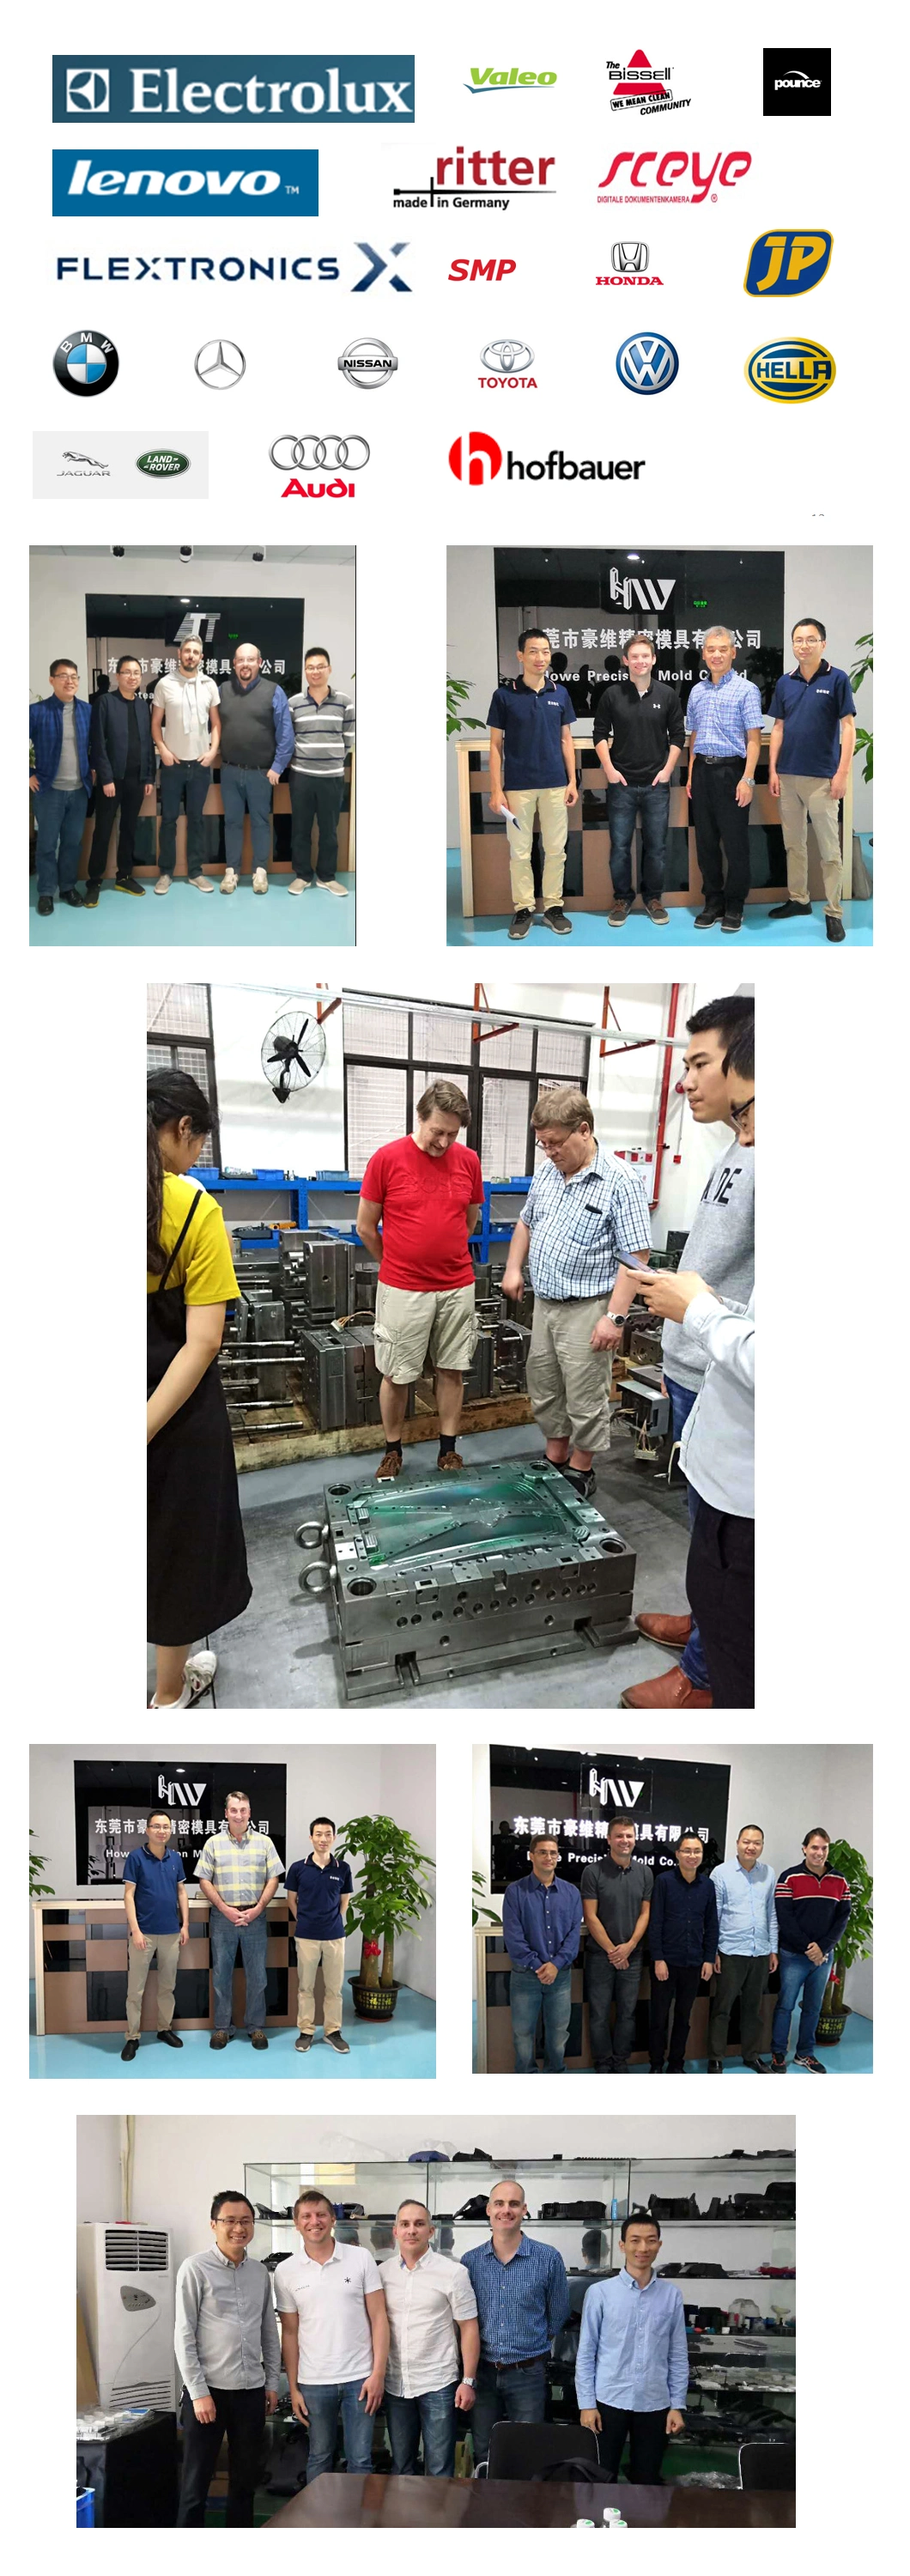 Sub Gate Type Moulds Manufacturer Customized Plastic Injection Mould